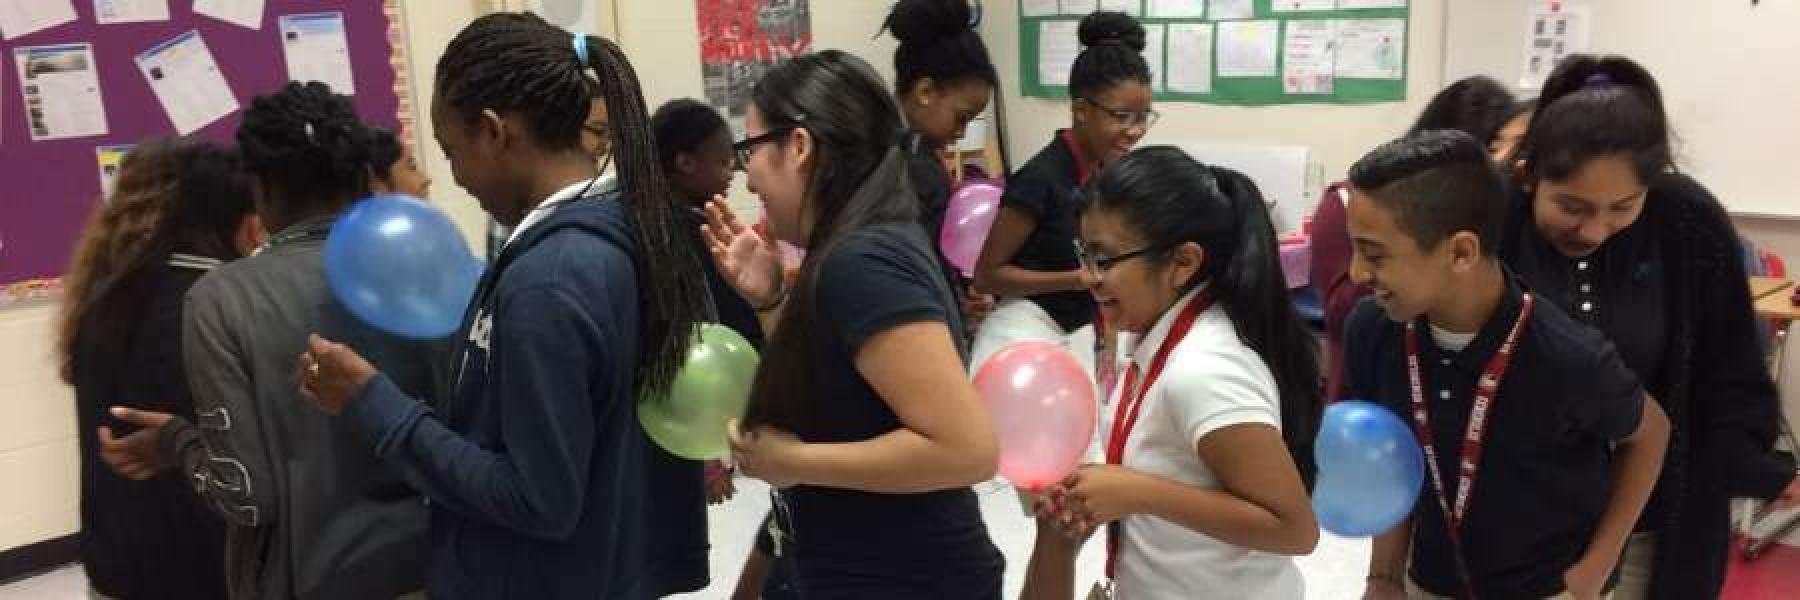 Students doing a balloon line up circle activity